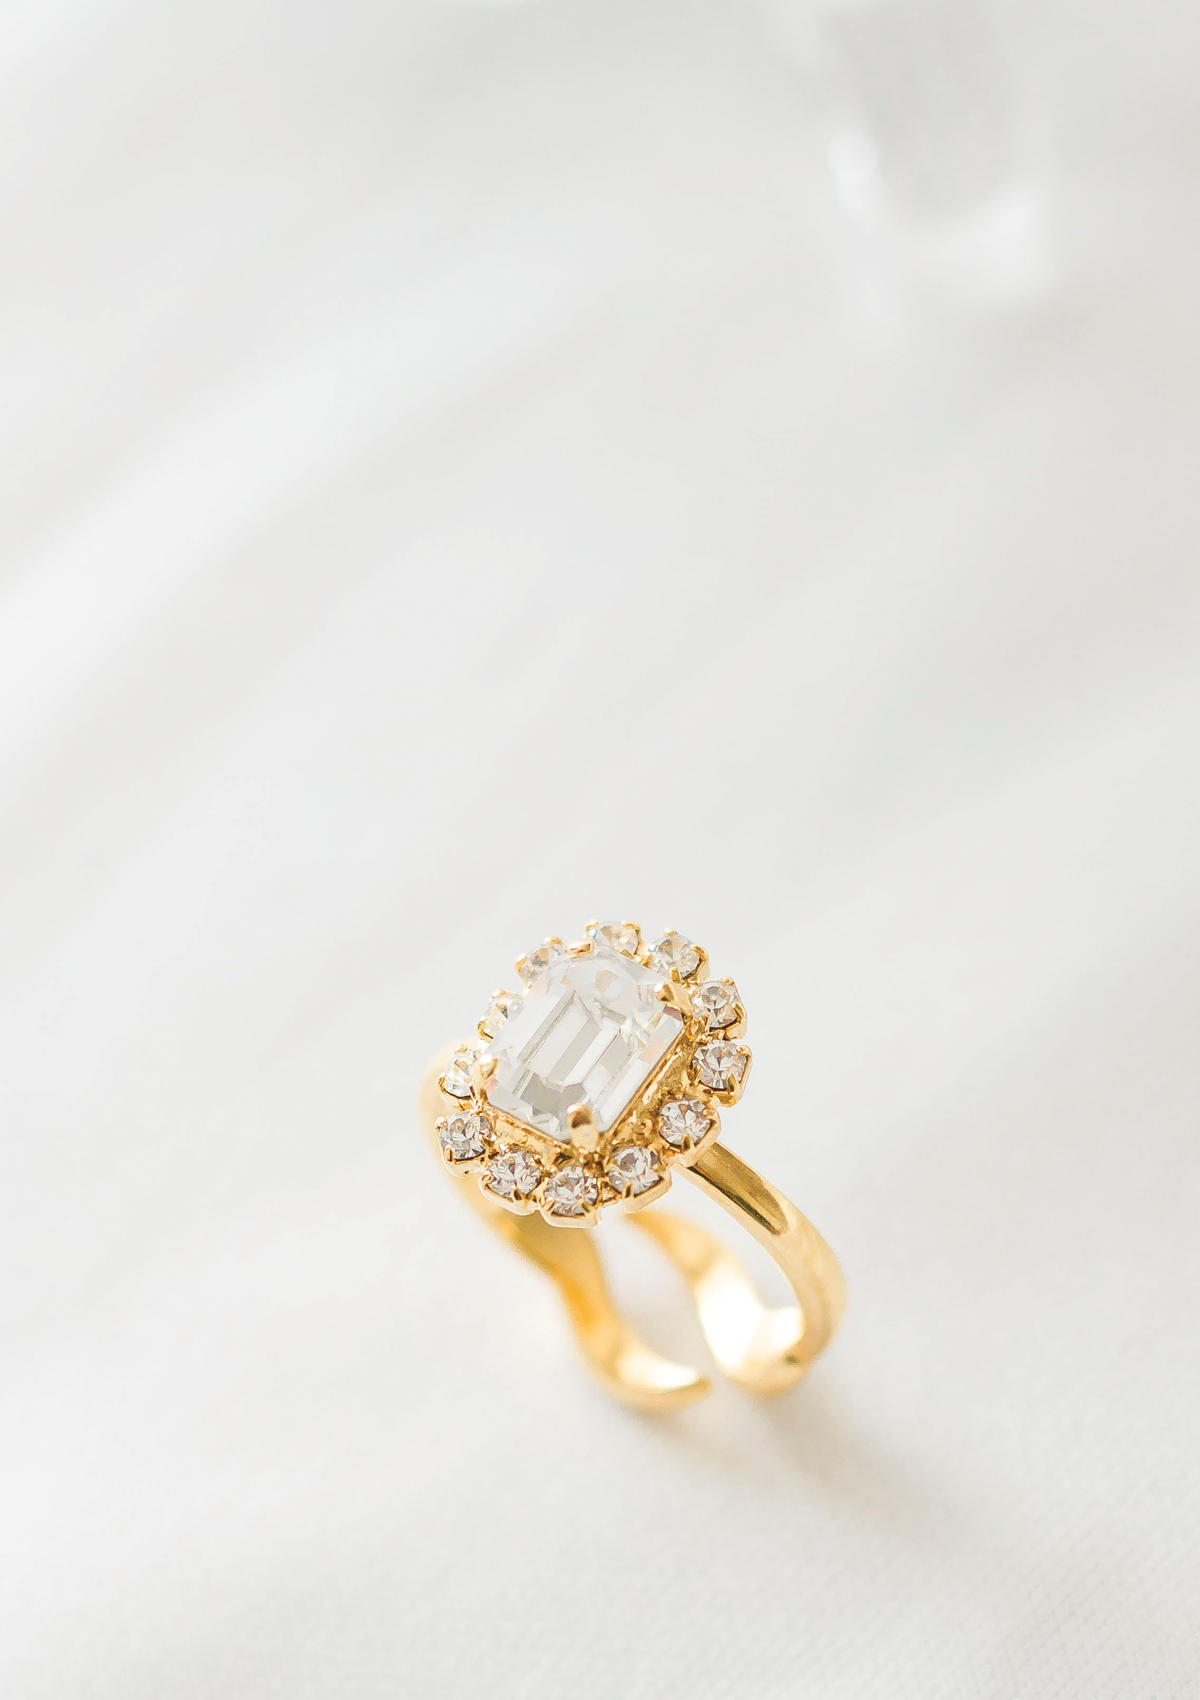 Mini Cambridge ring, jewelry designed and made by Sarah Gauci in Malta. 18K gold plated or Rose Gold. 